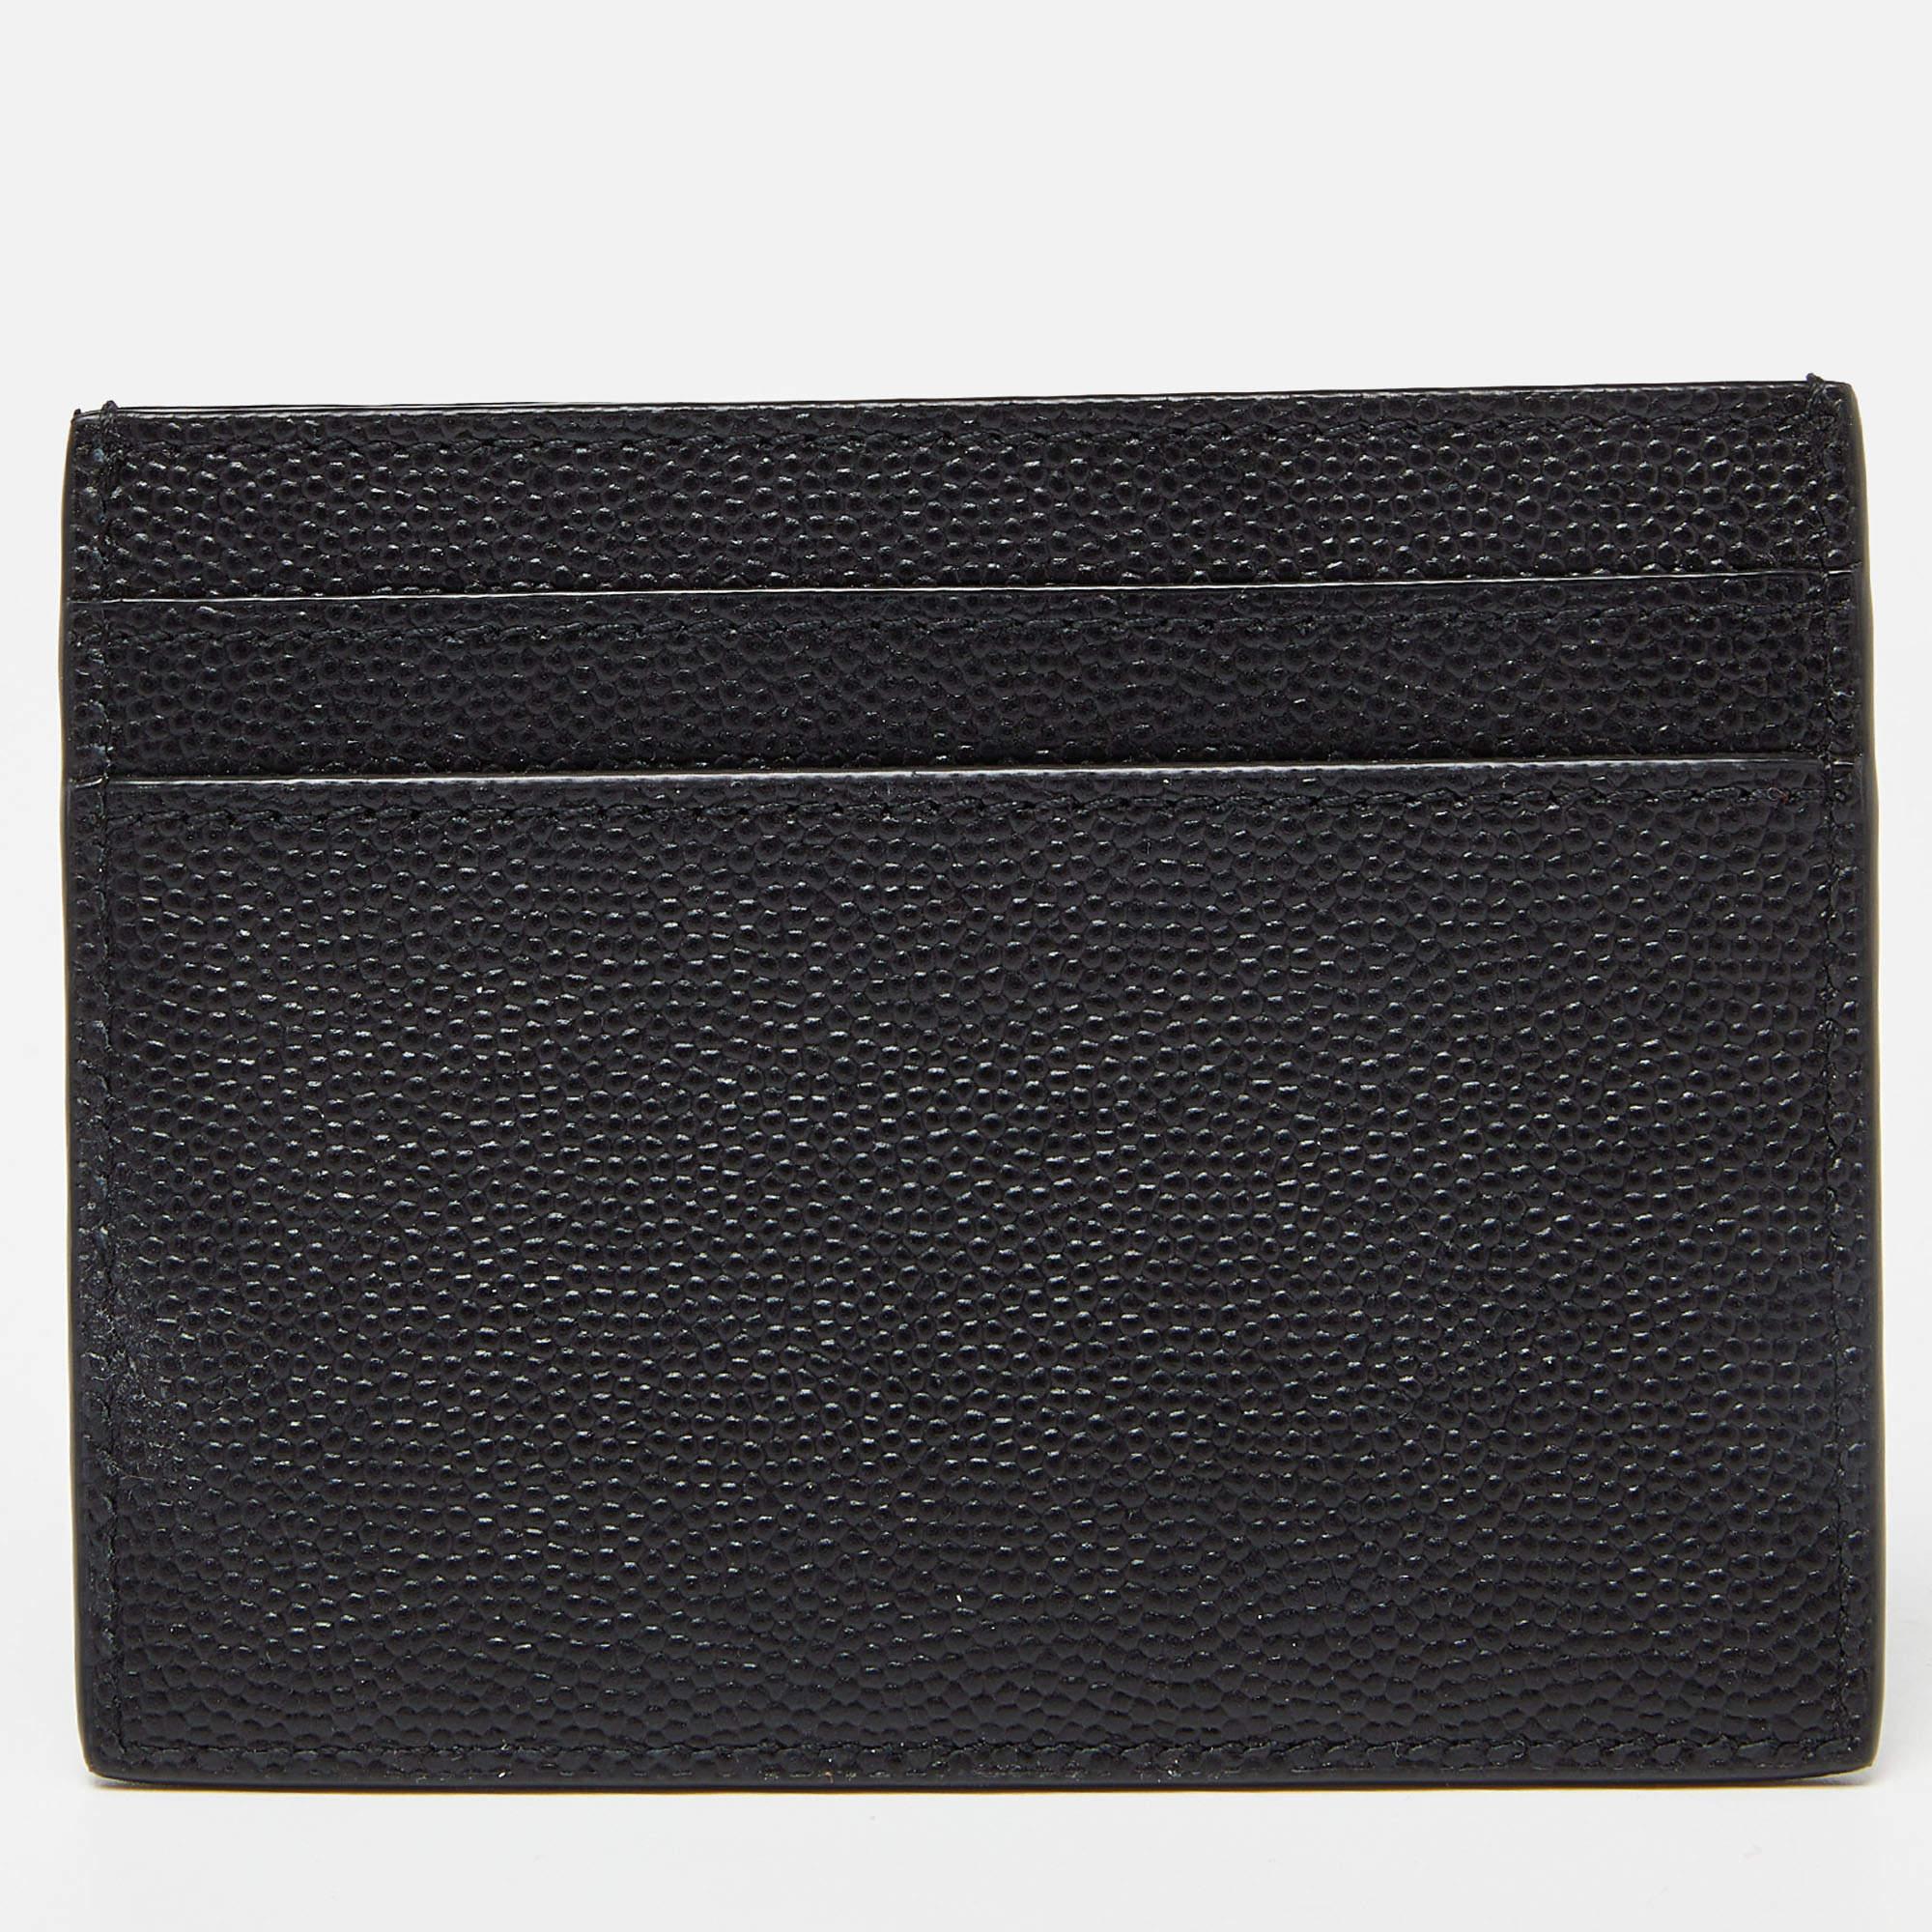 With its compact silhouette, this Saint Laurent card holder can easily fit into your handbag or clutch. Made from leather, it has lined card slots on both sides and the YSL on the front.

